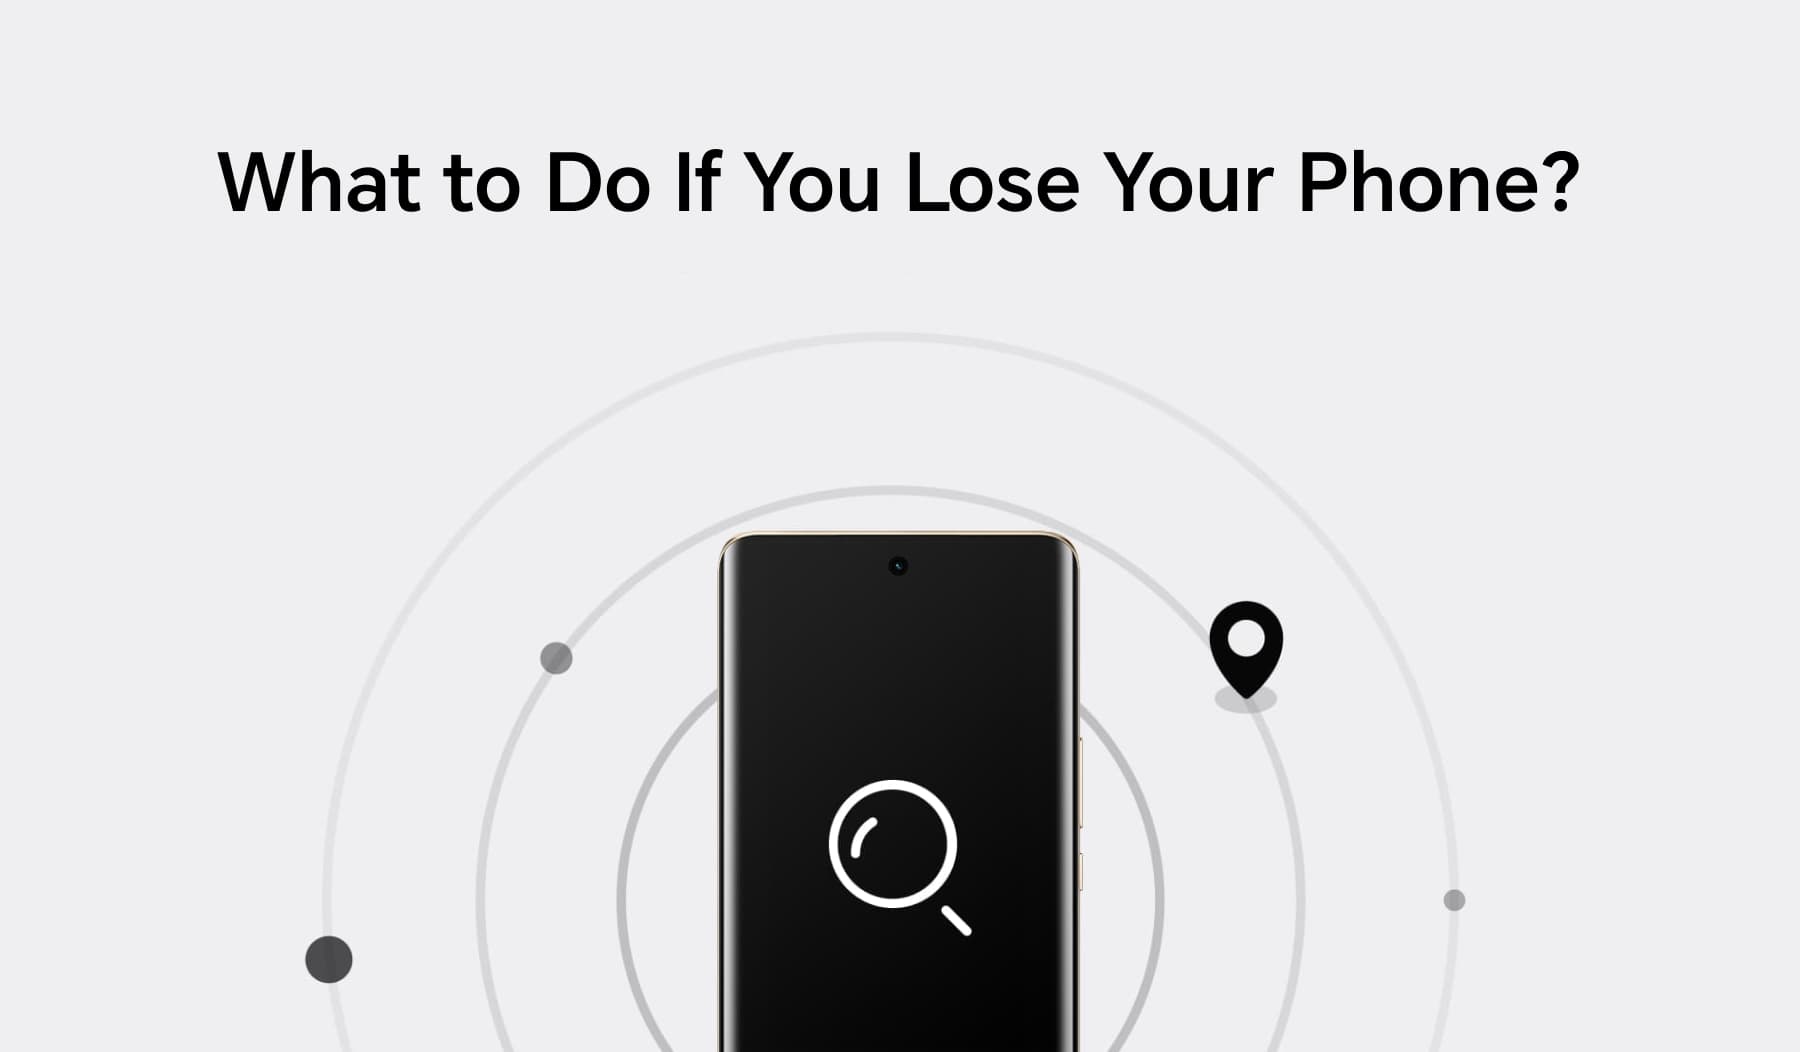 What to Do If You Lose Your Phone?